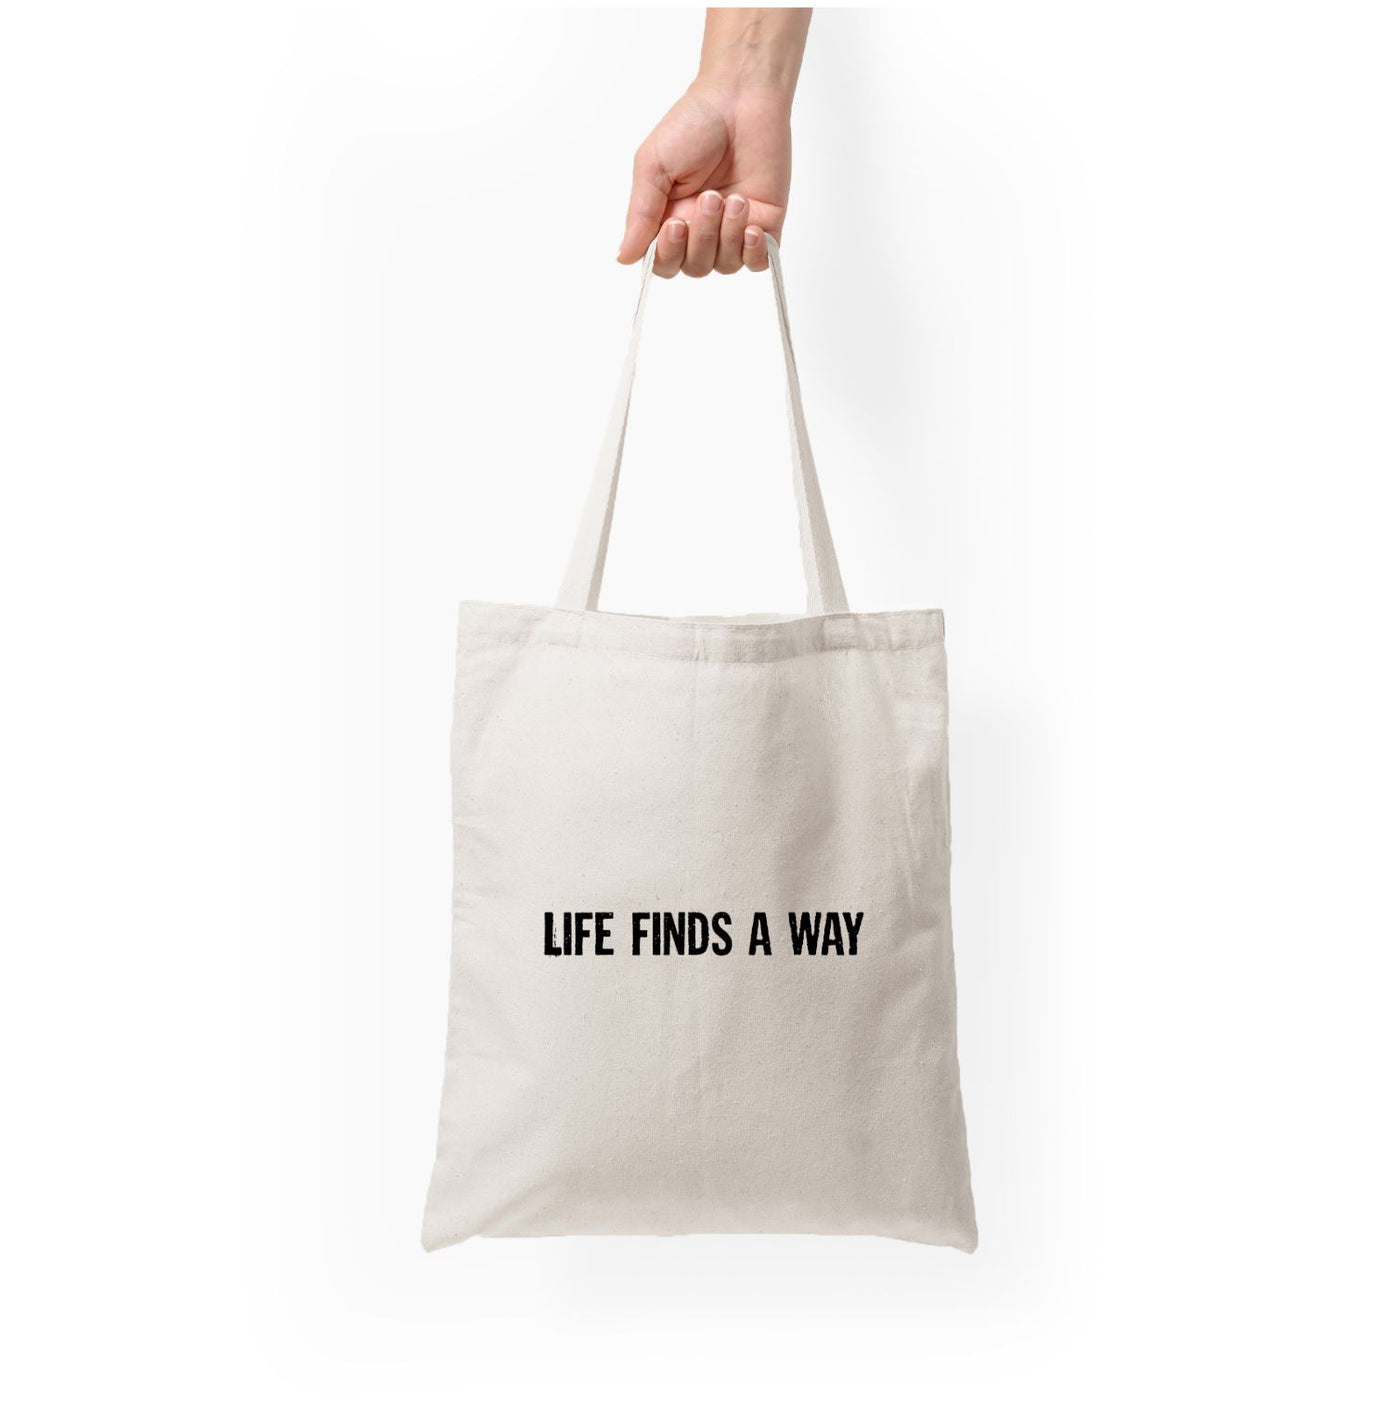 Life finds a way - Jurassic Park Tote Bag